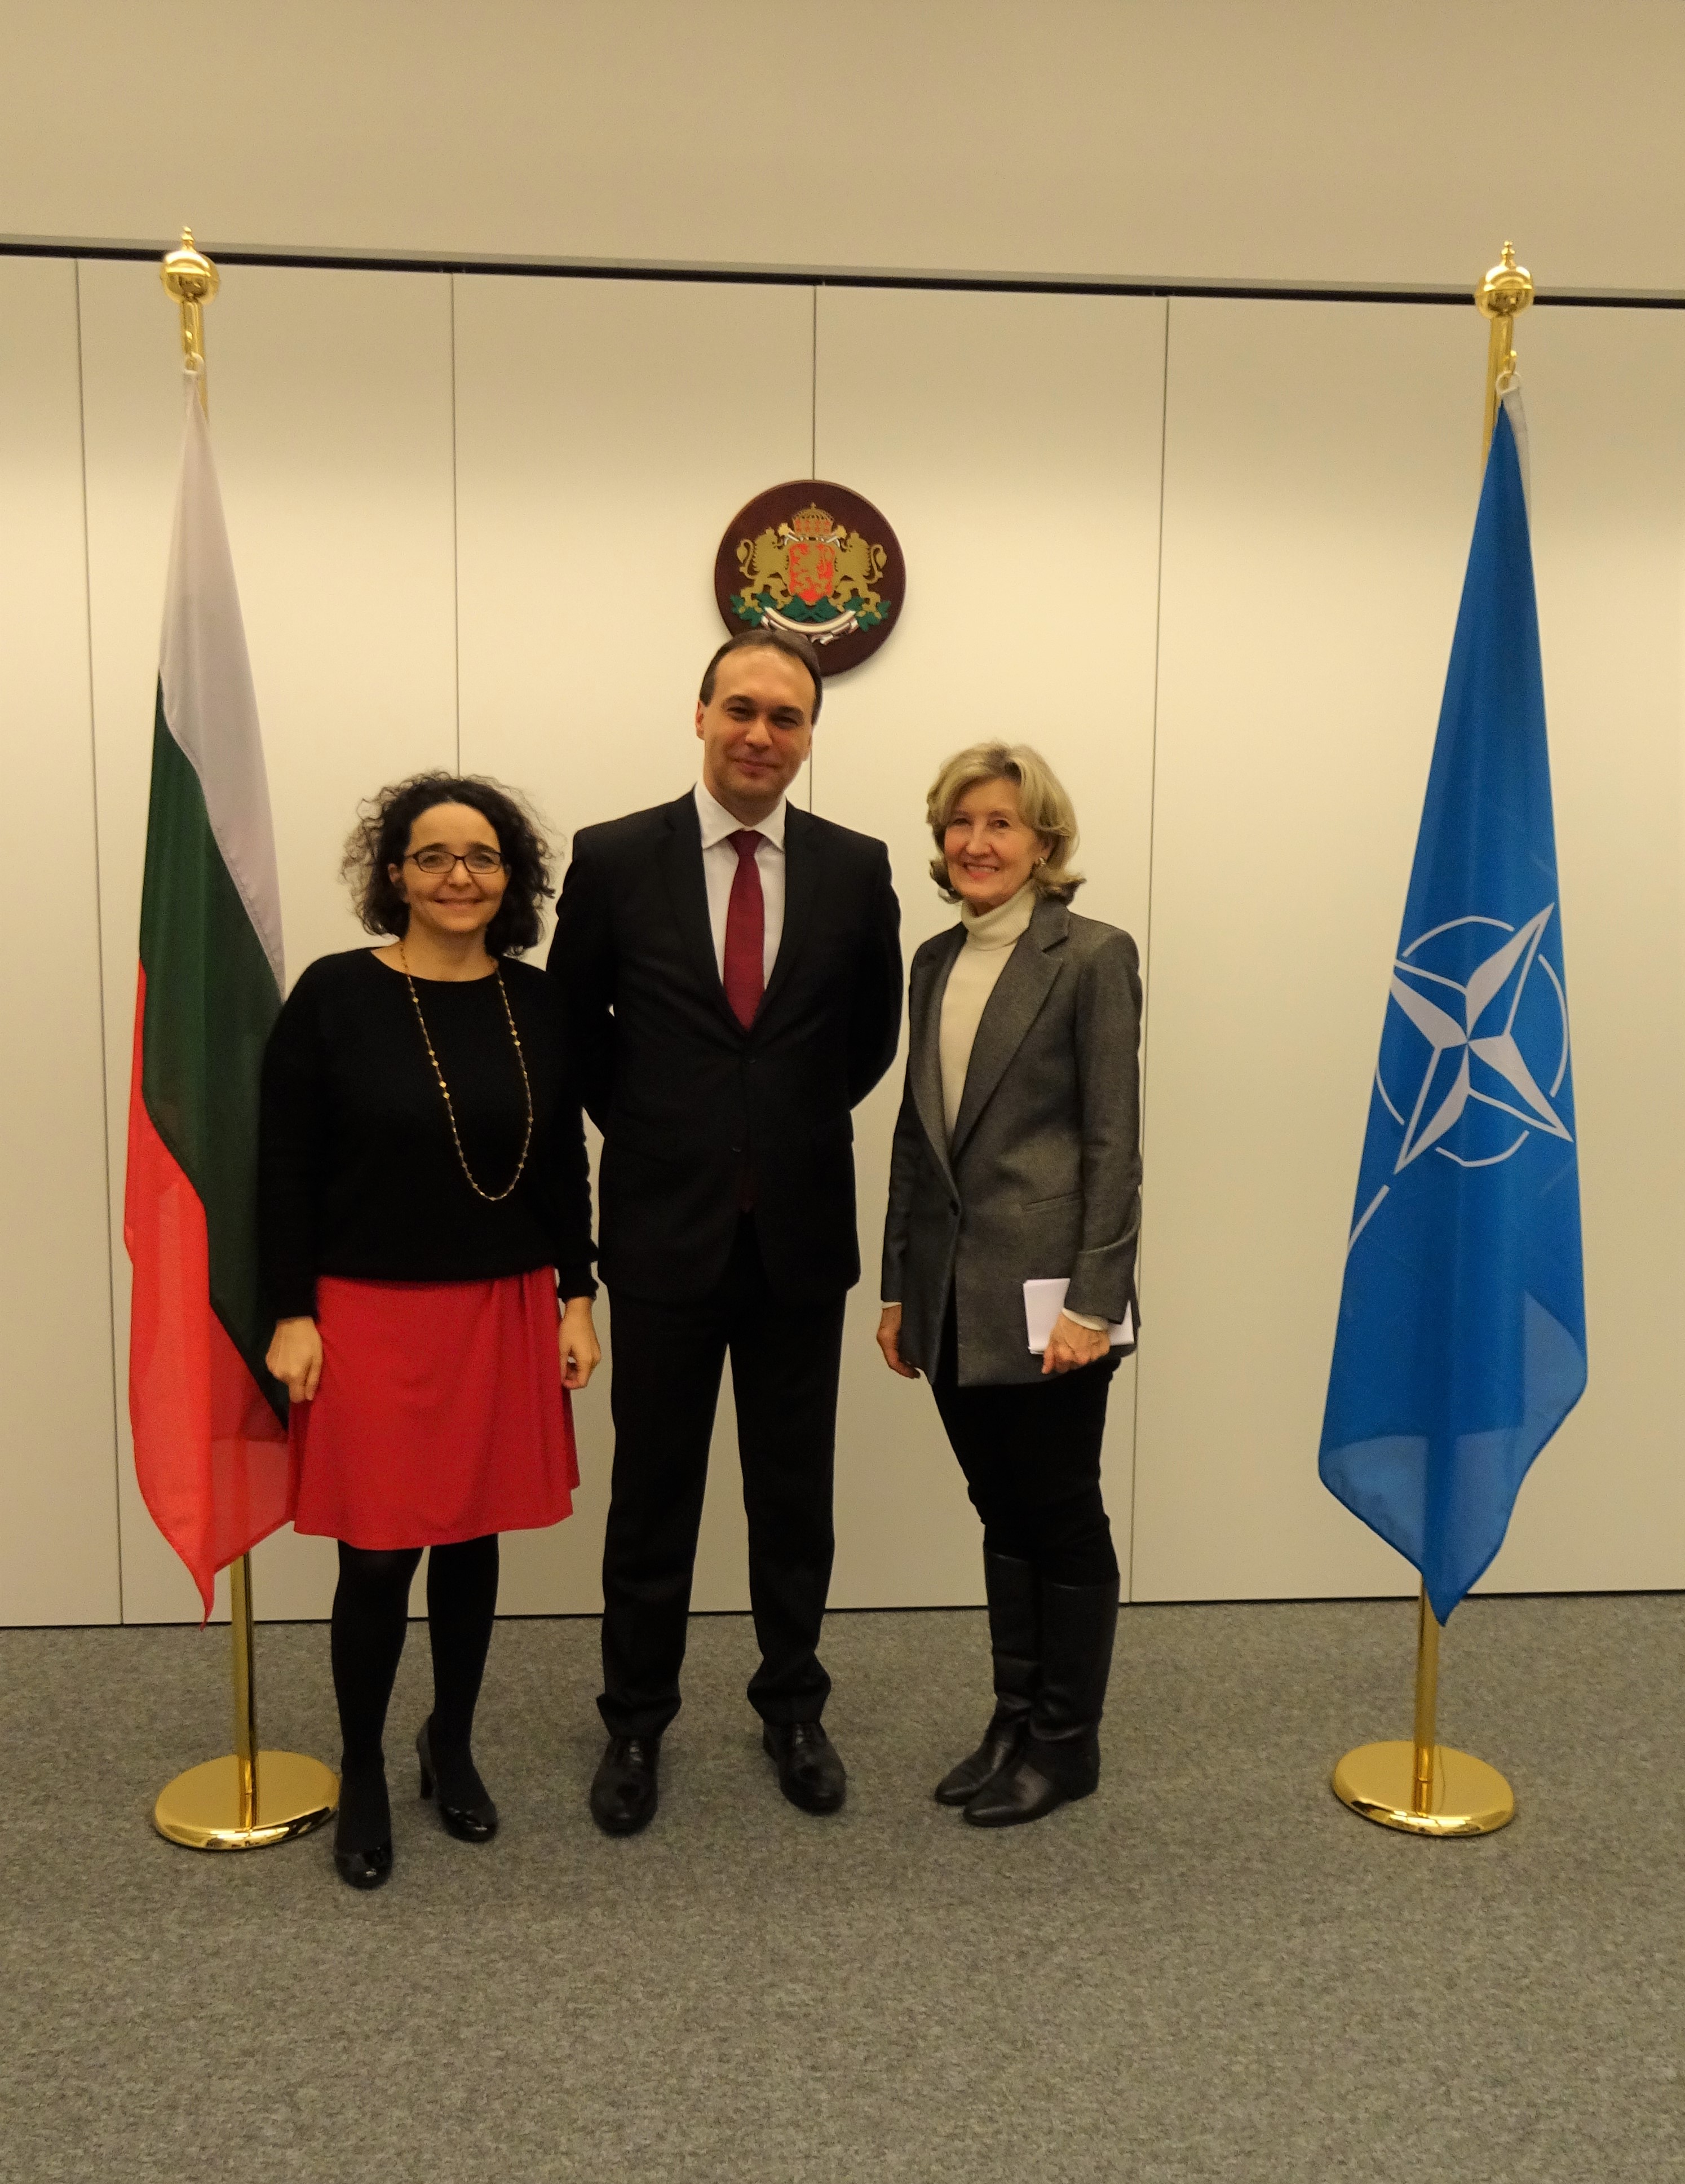 Bulgaria's National Day was celebrated with martenitsa's at NATO Headquarters